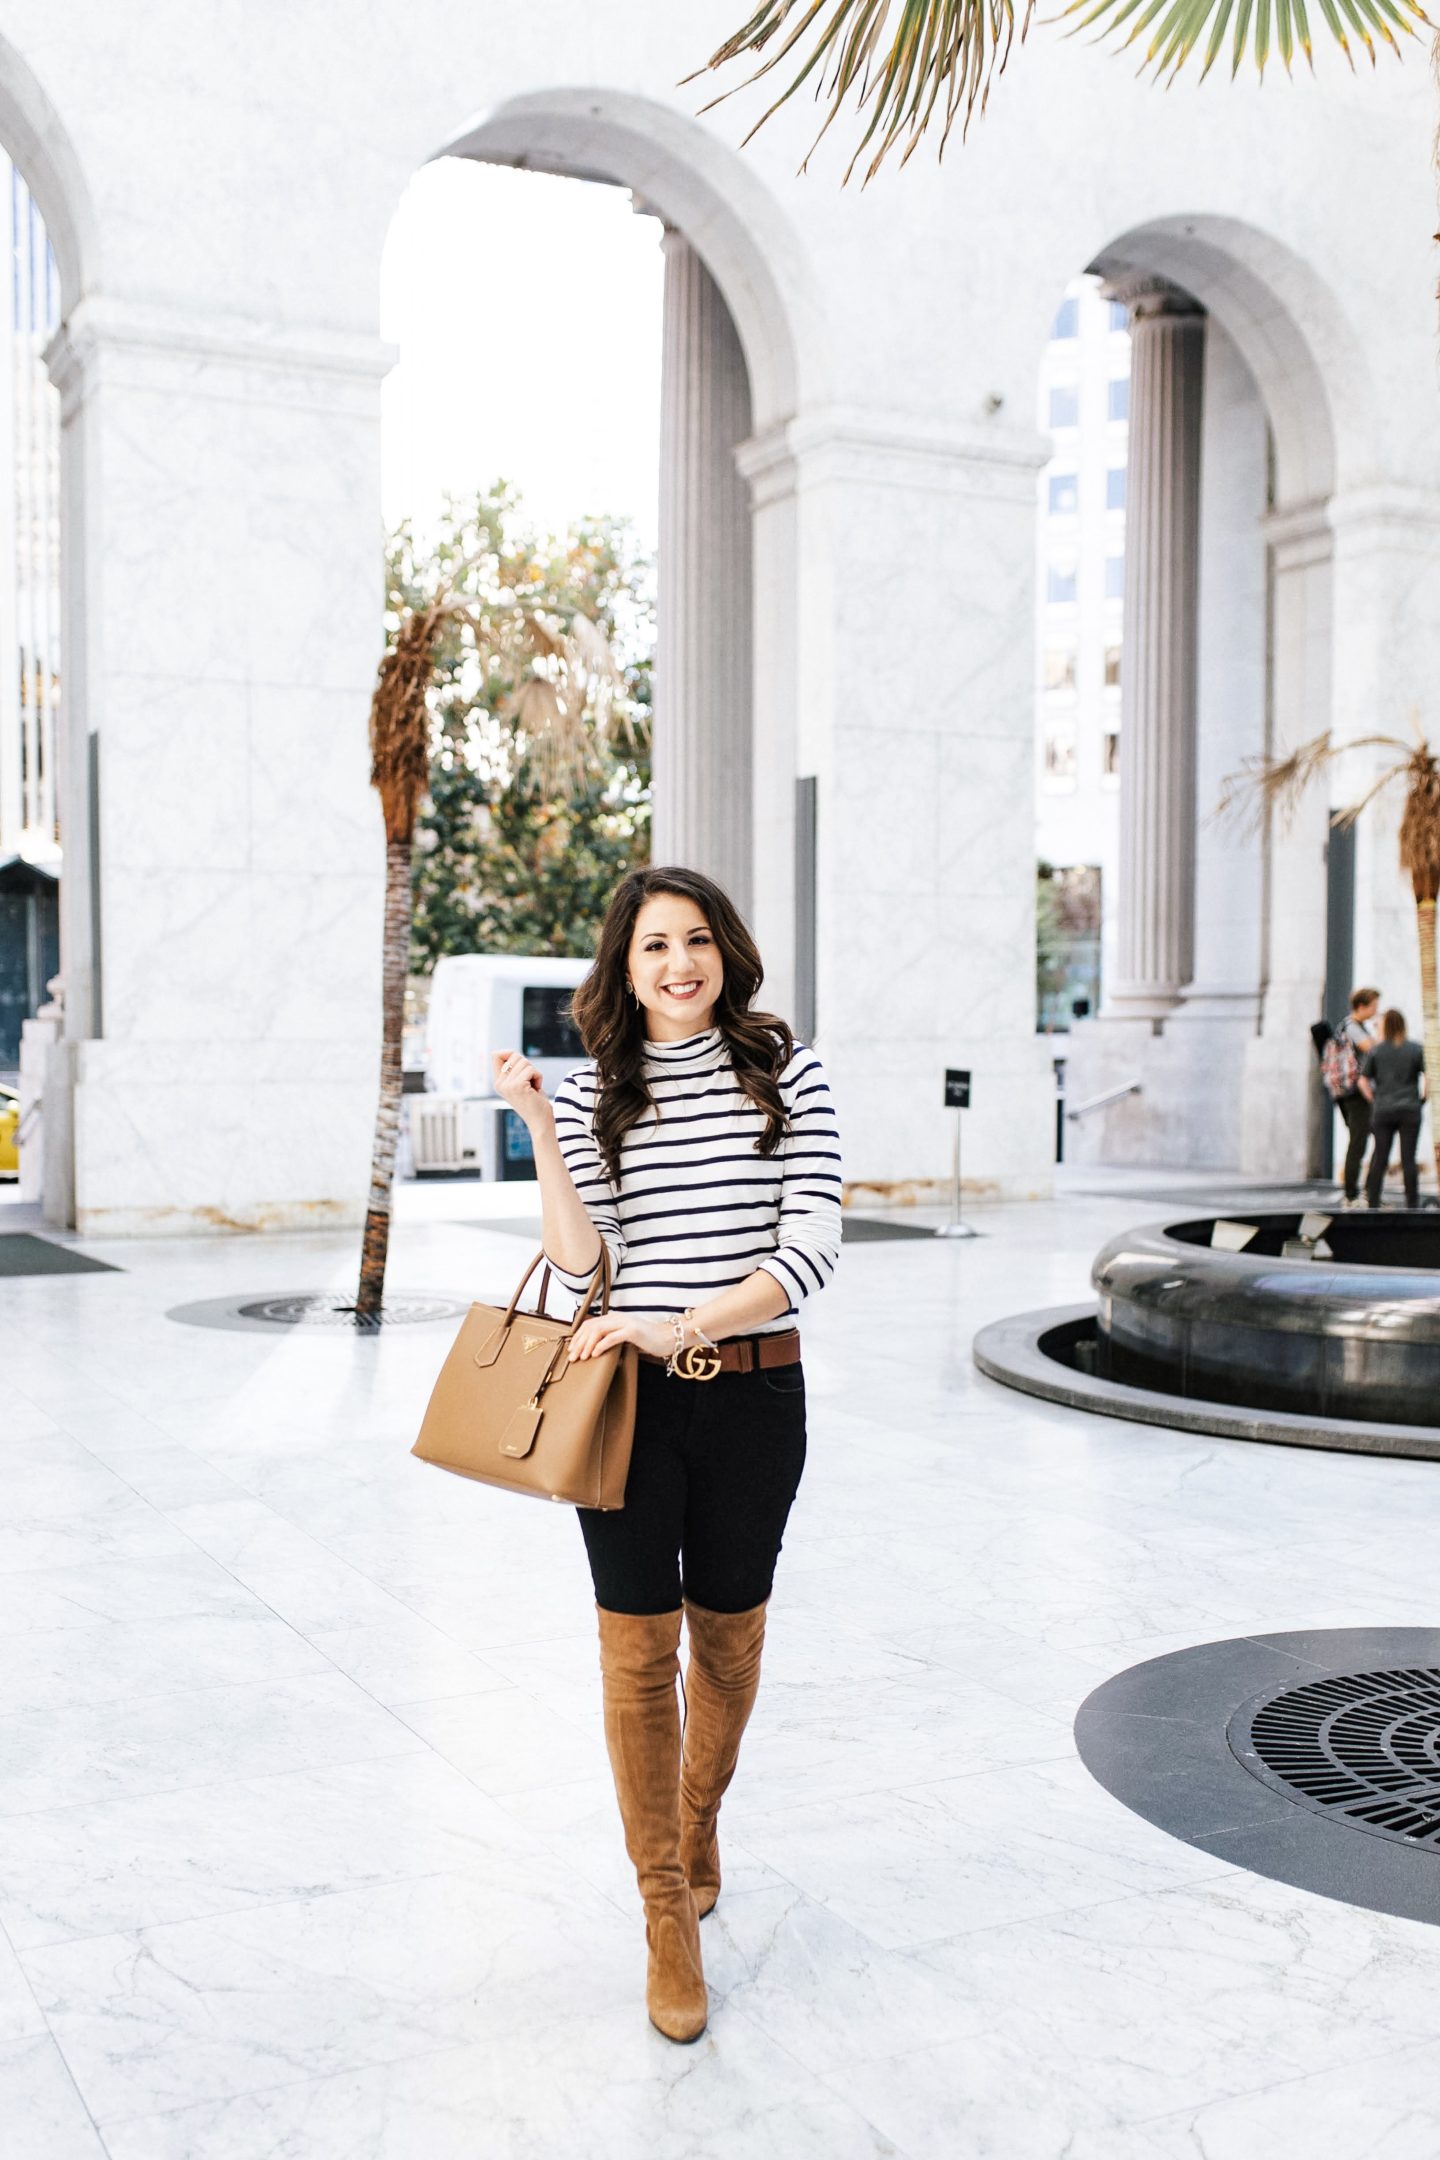 Fifteen Minutes to Flawless Charlotte Fashion Blogger